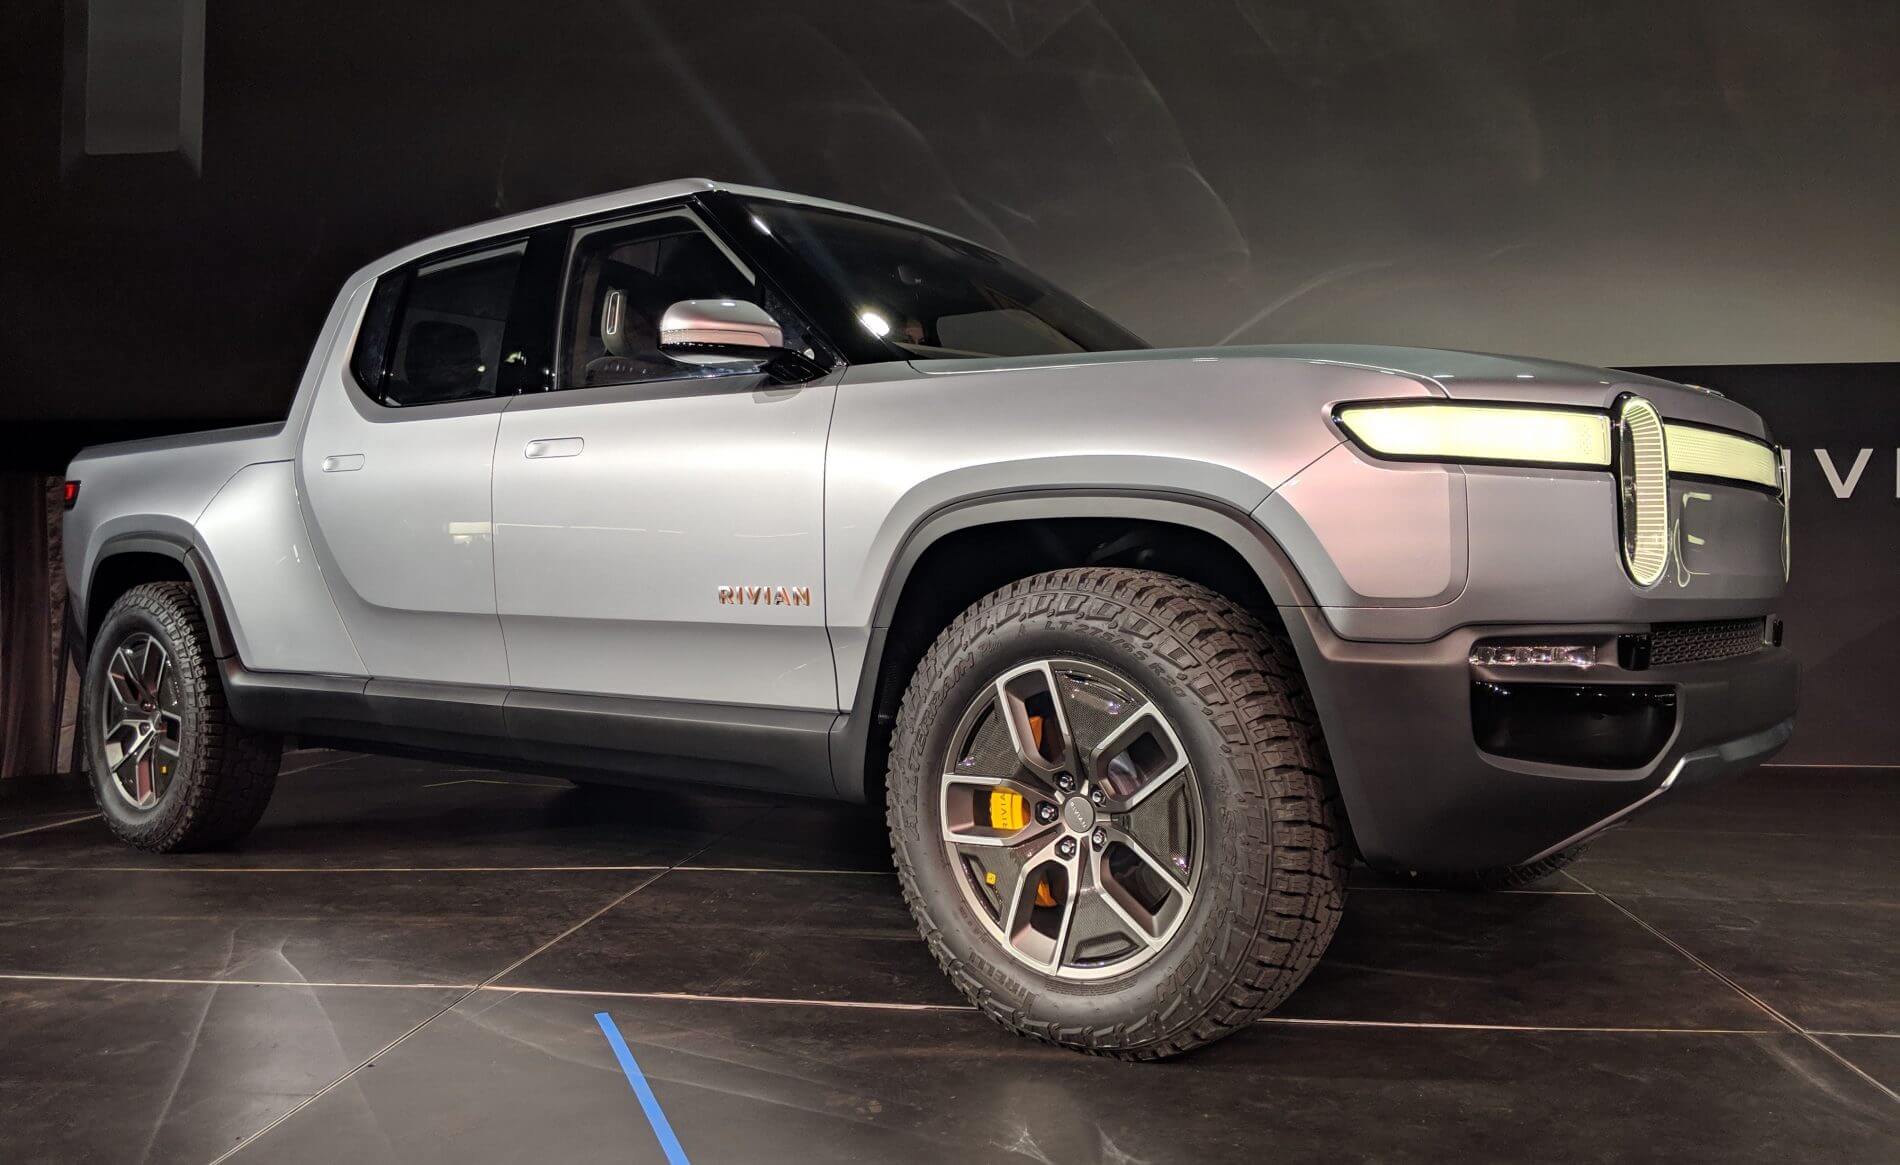 Amazon and GM may help fund an electric pickup truck by Rivian